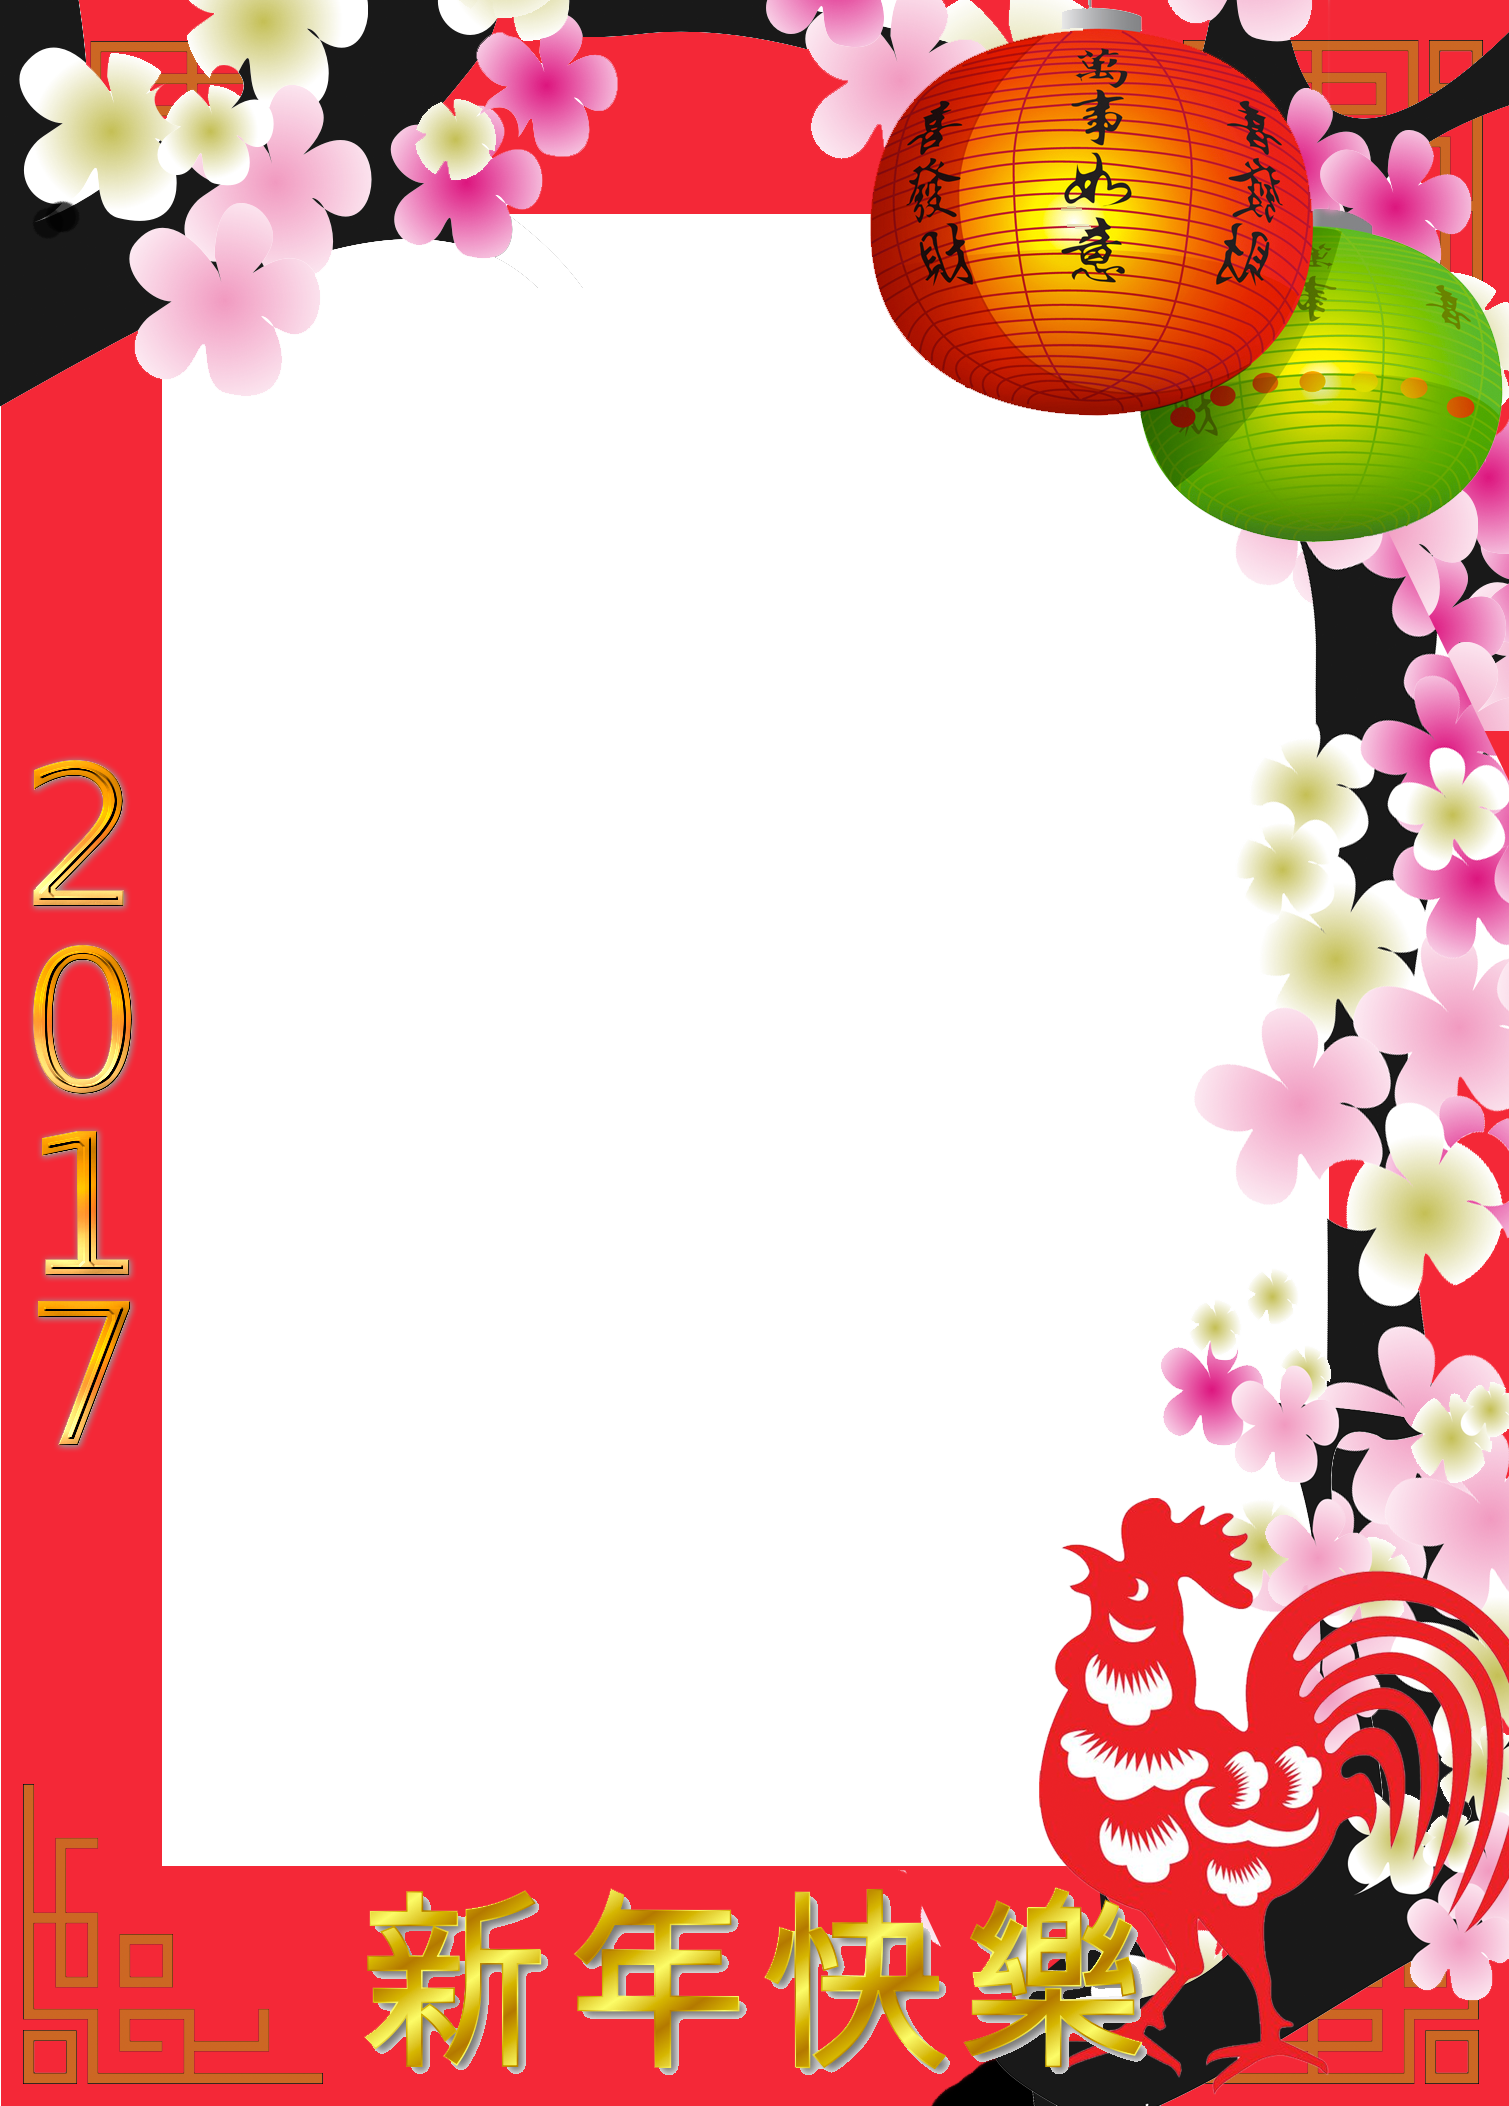 Chinese New Year Frame PNG Transparent